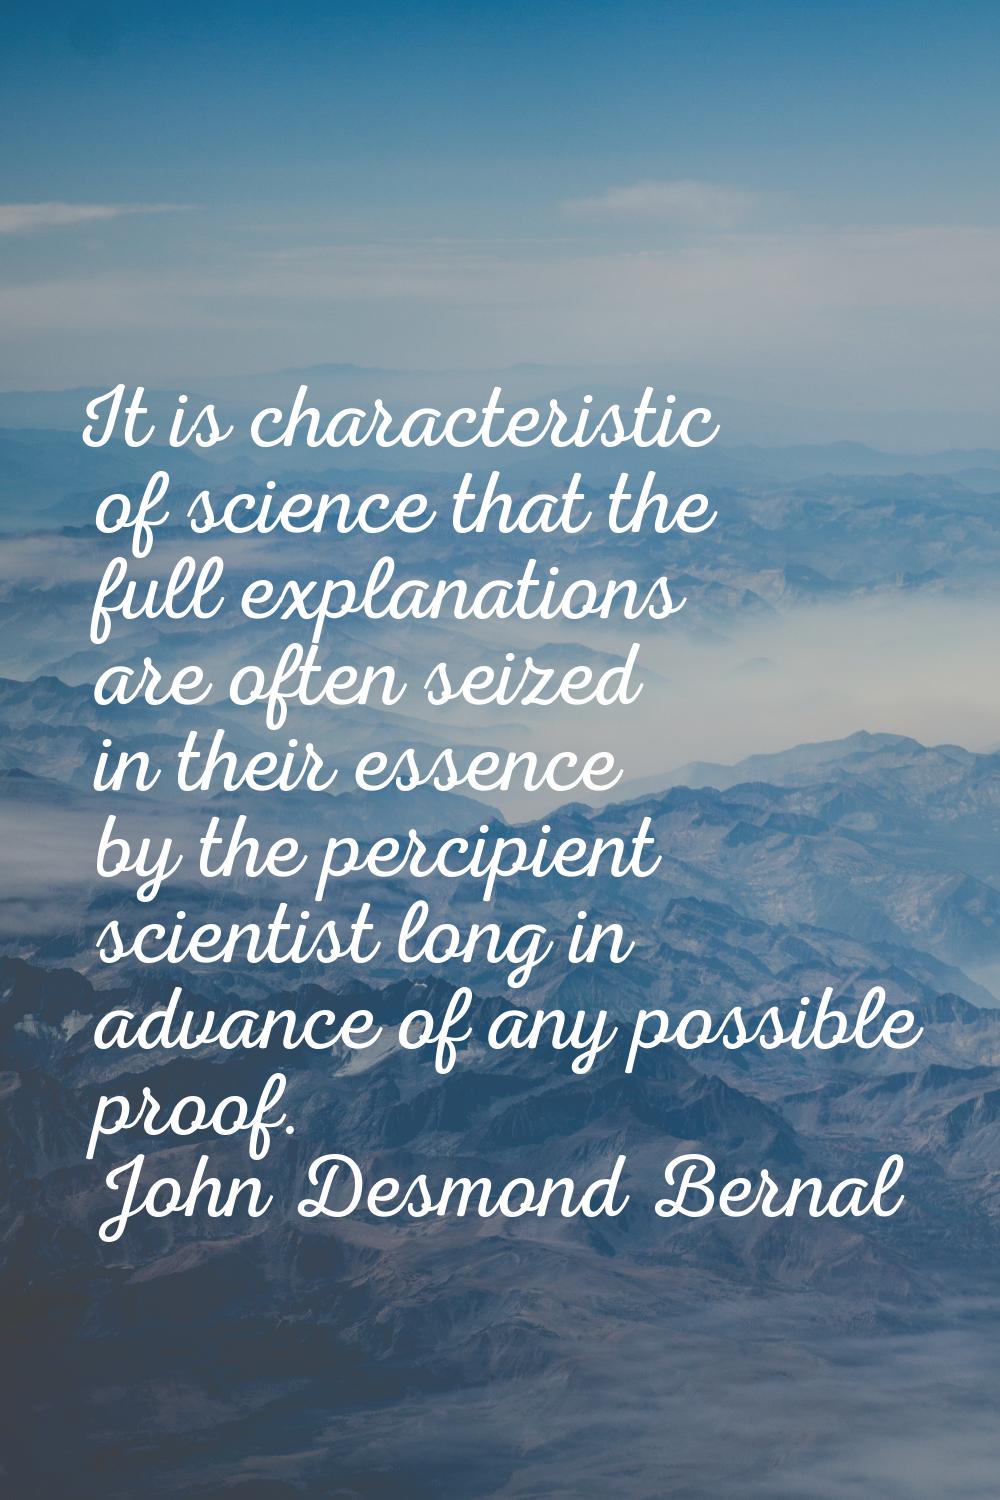 It is characteristic of science that the full explanations are often seized in their essence by the